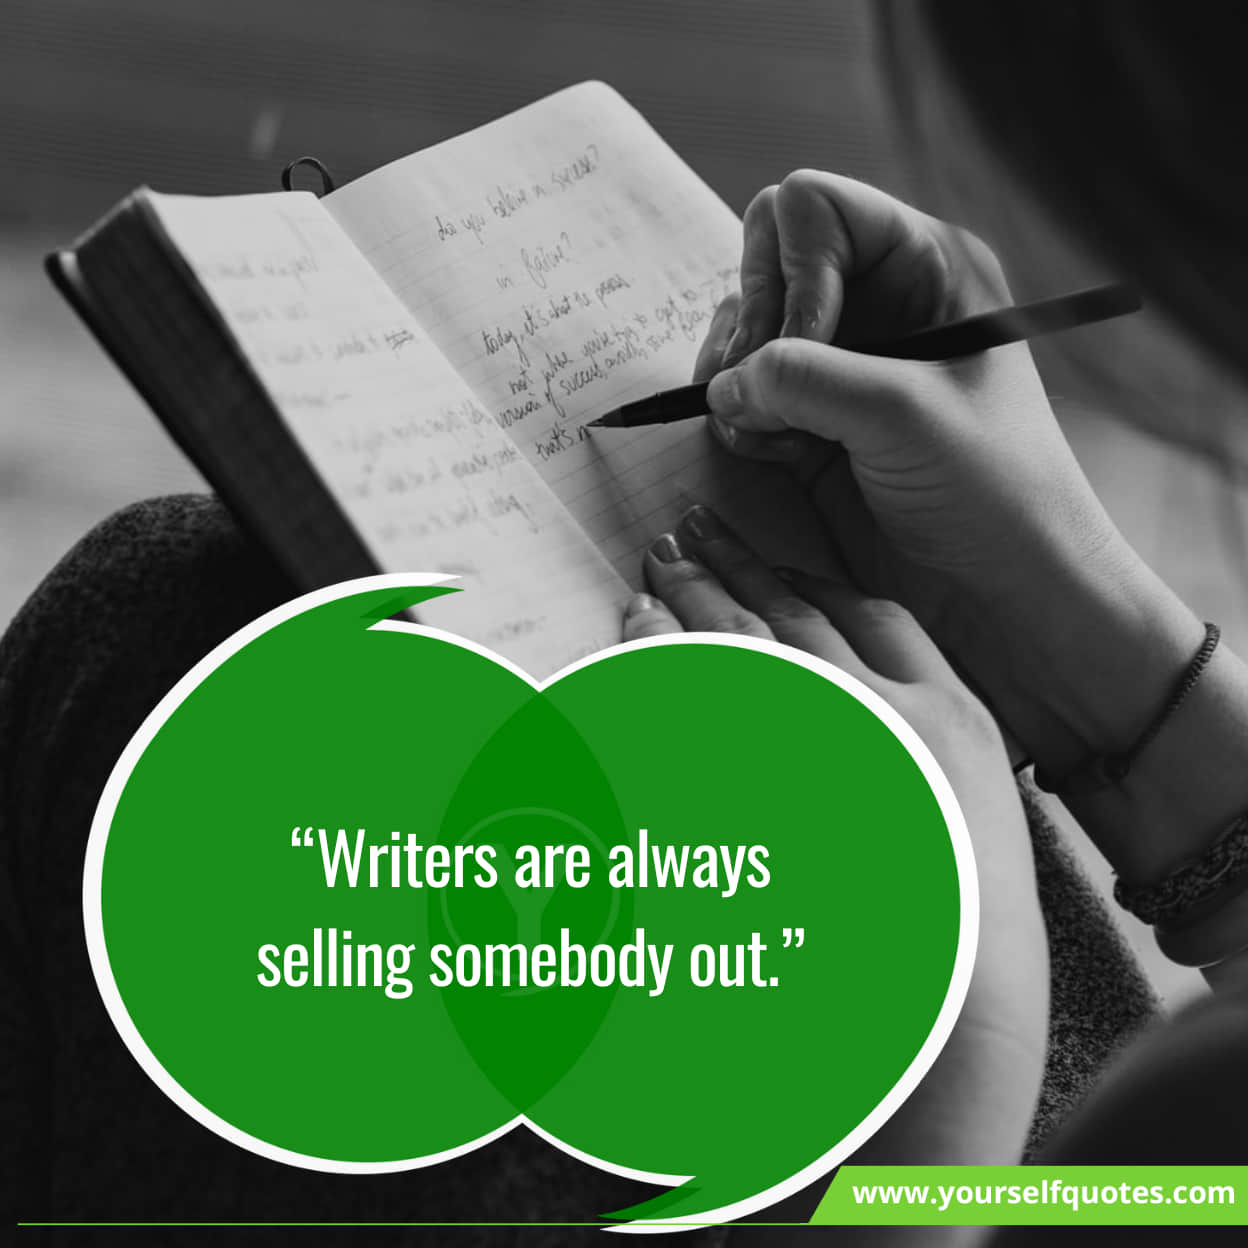 Quotes For Writers For Motivation